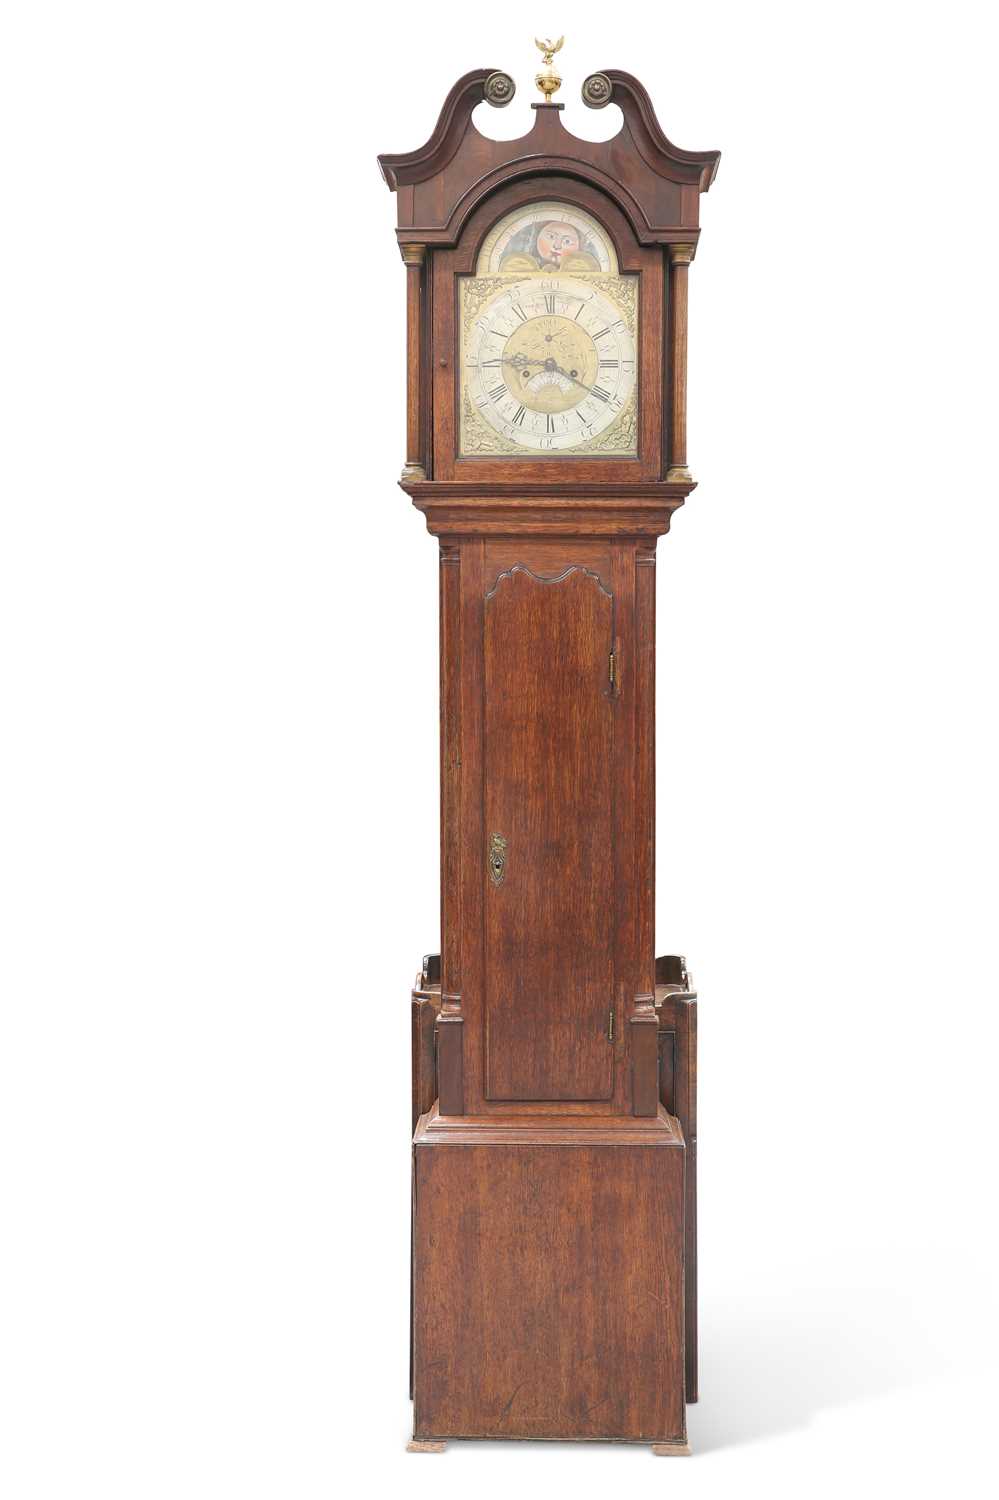 A GEORGE III OAK EIGHT-DAY LONGCASE CLOCK, SIGNED THOMAS LISTER, LUDDENDEN